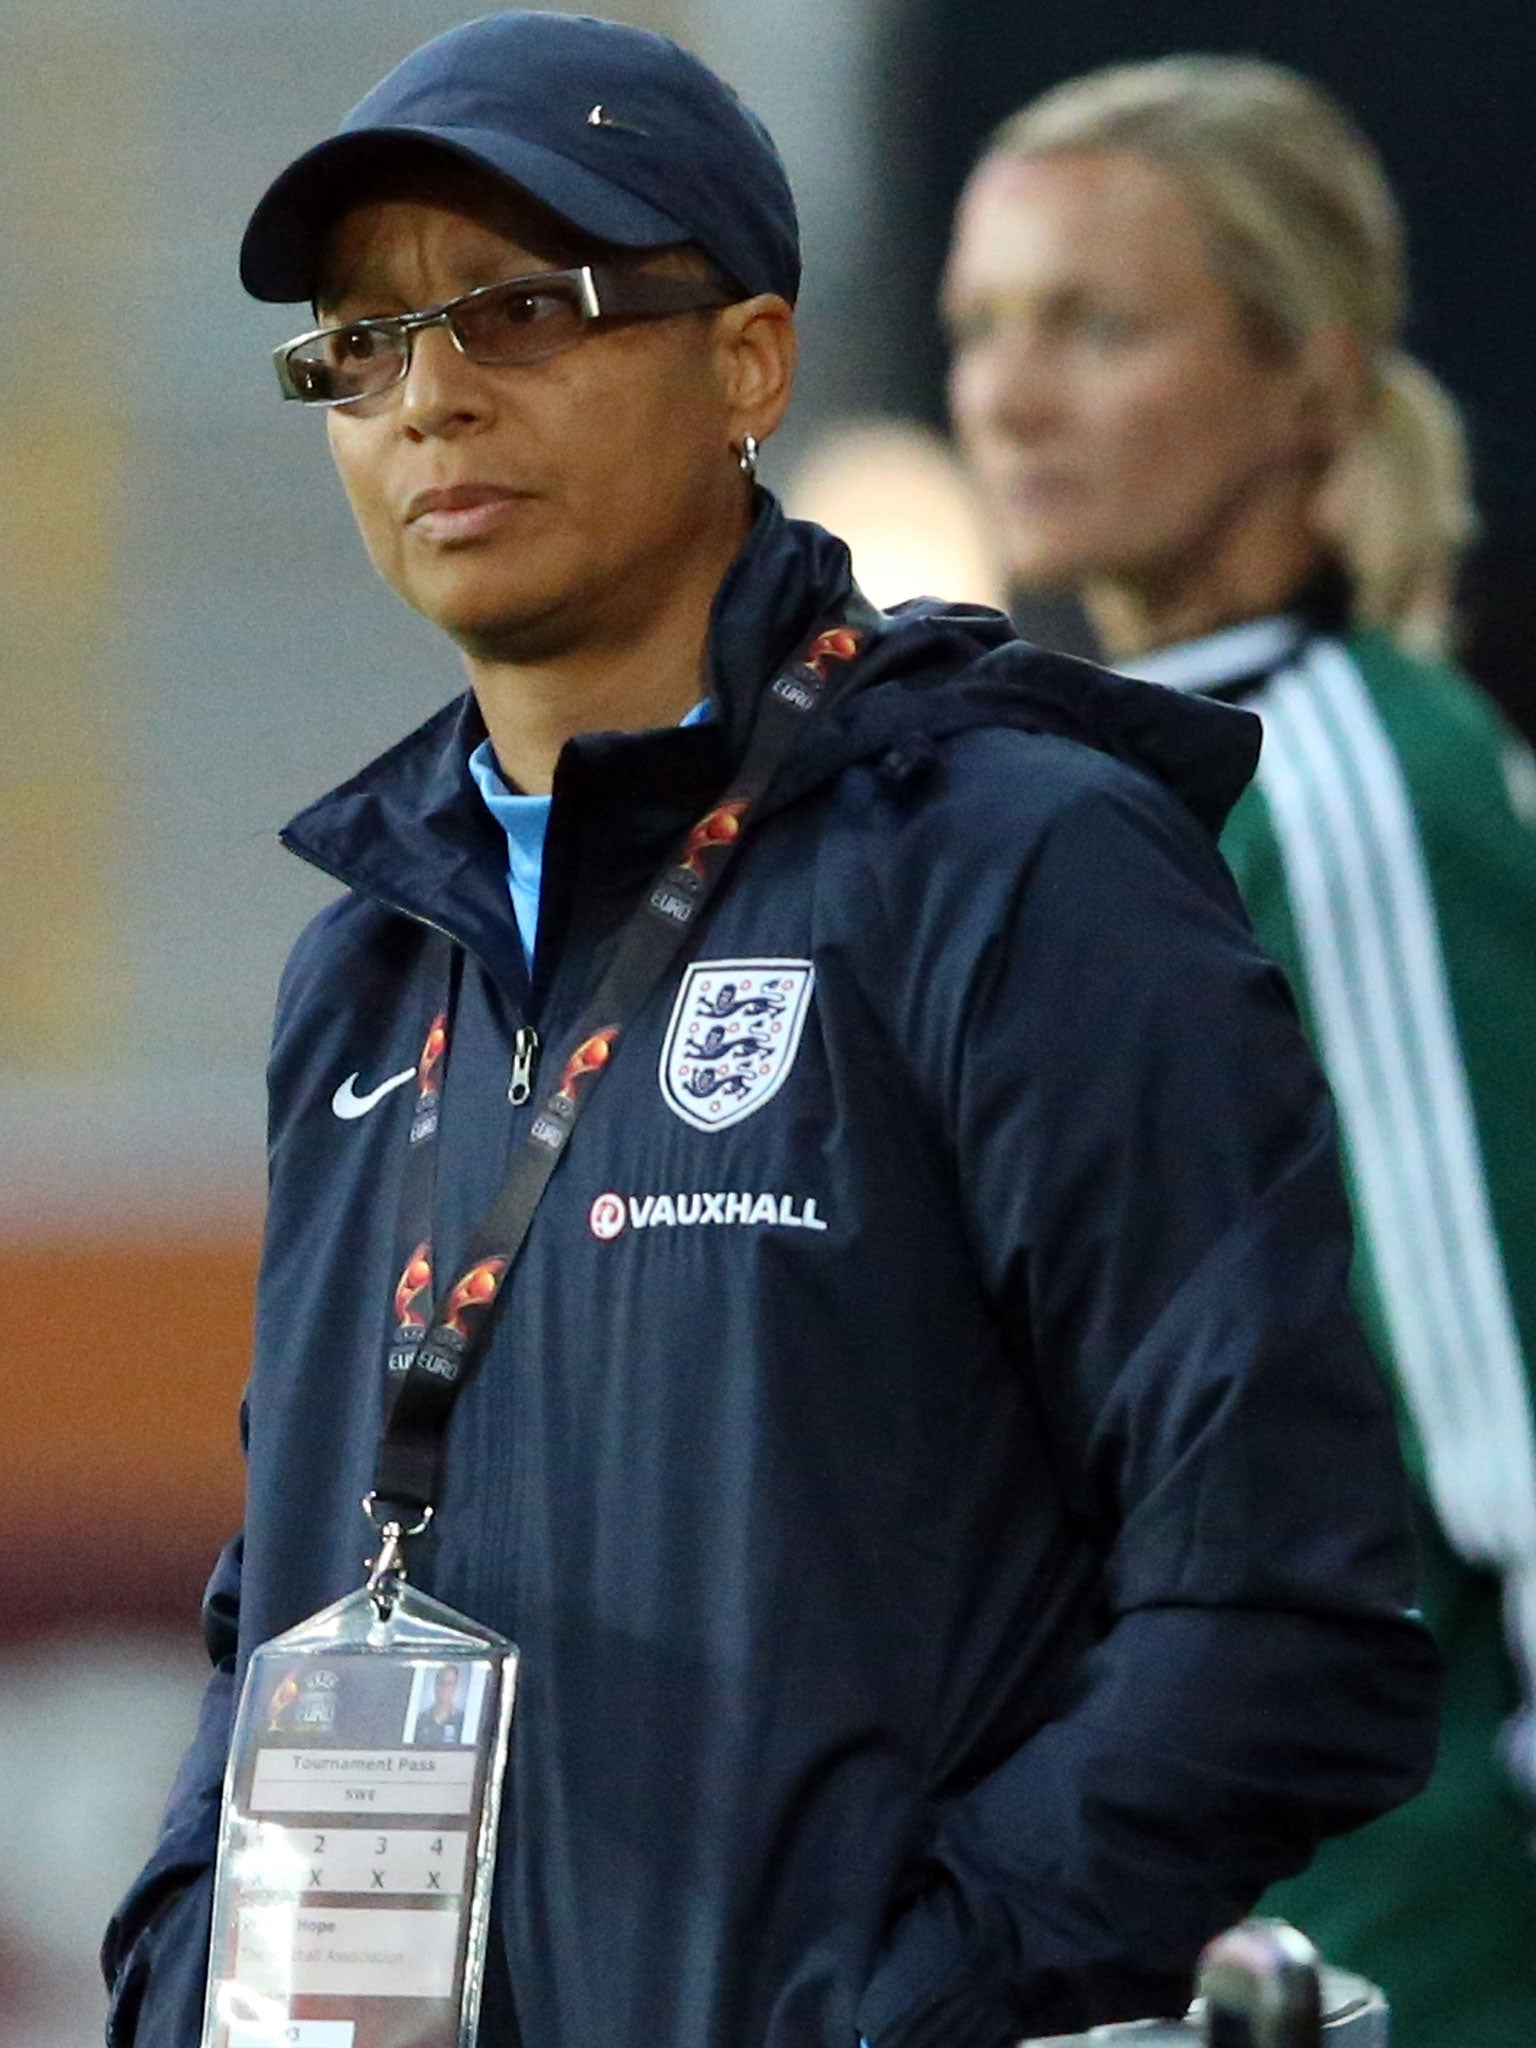 Hope Powell’s England face Russia in their second European Championship group game, and it is a 'must-win' fixture according to the national coach after Friday’s 3-2 defeat by Spain